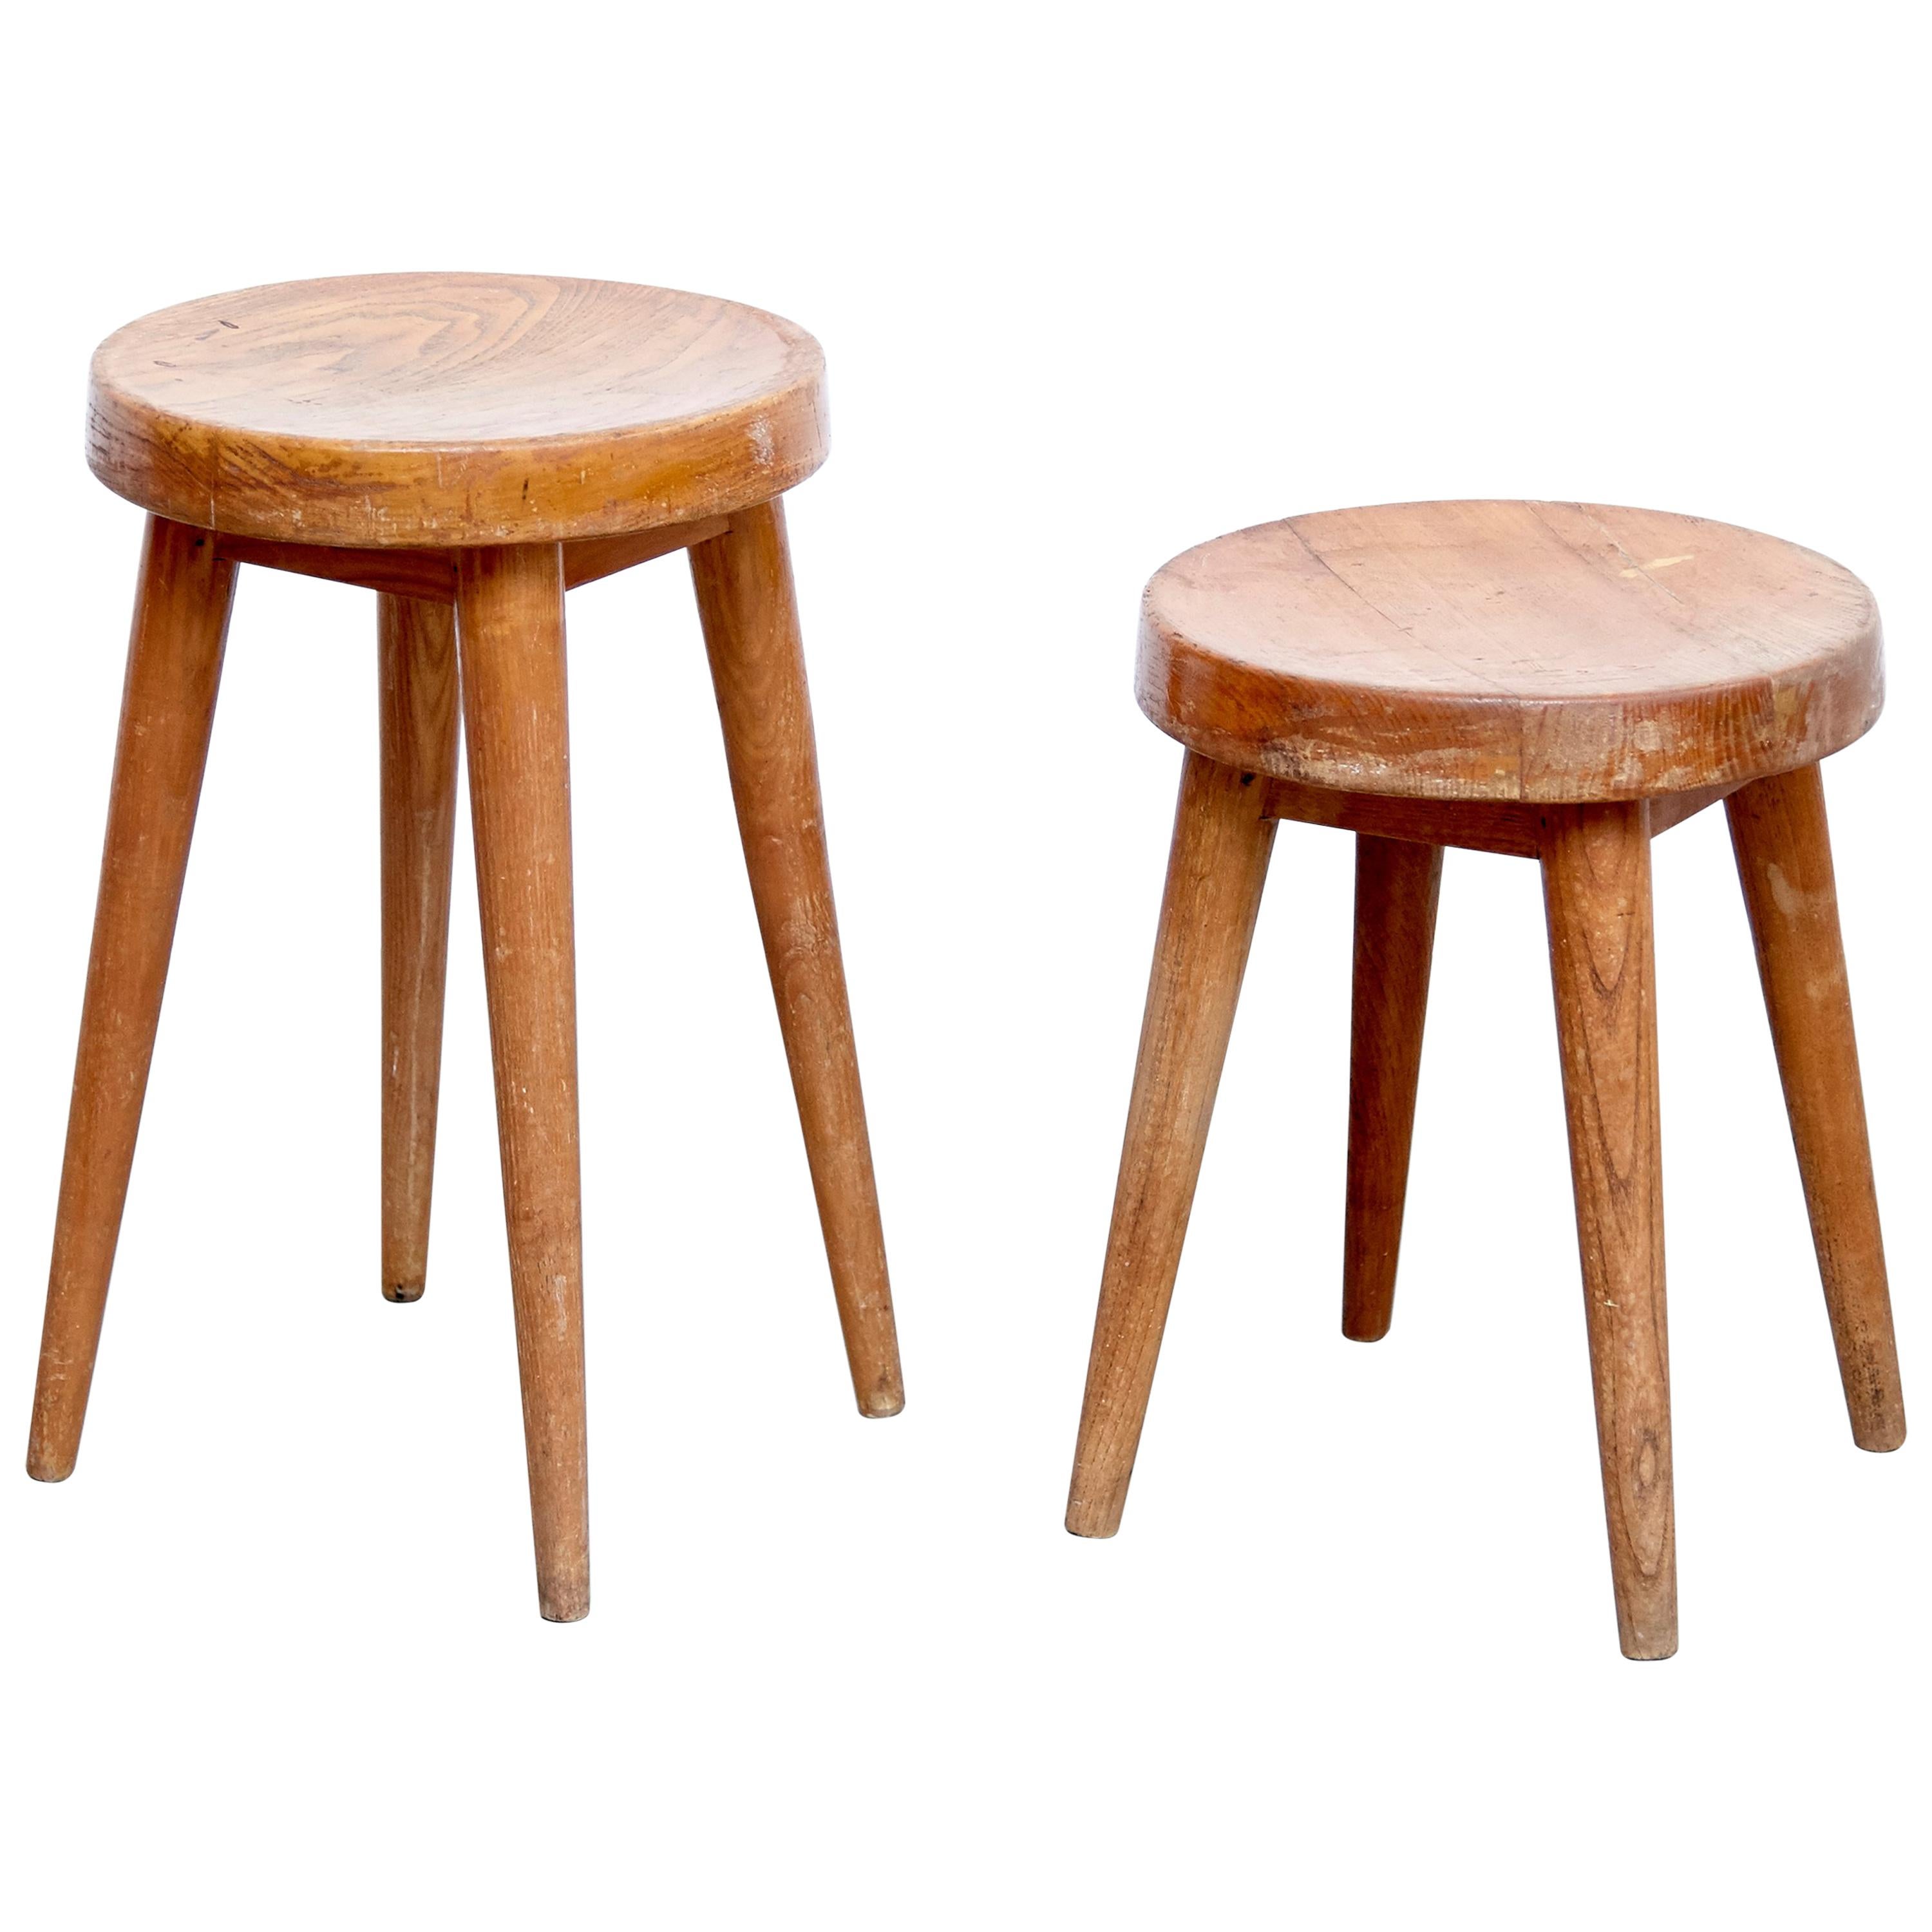 Pair of Pierre Jeanneret & Charlotte Perriand Stool